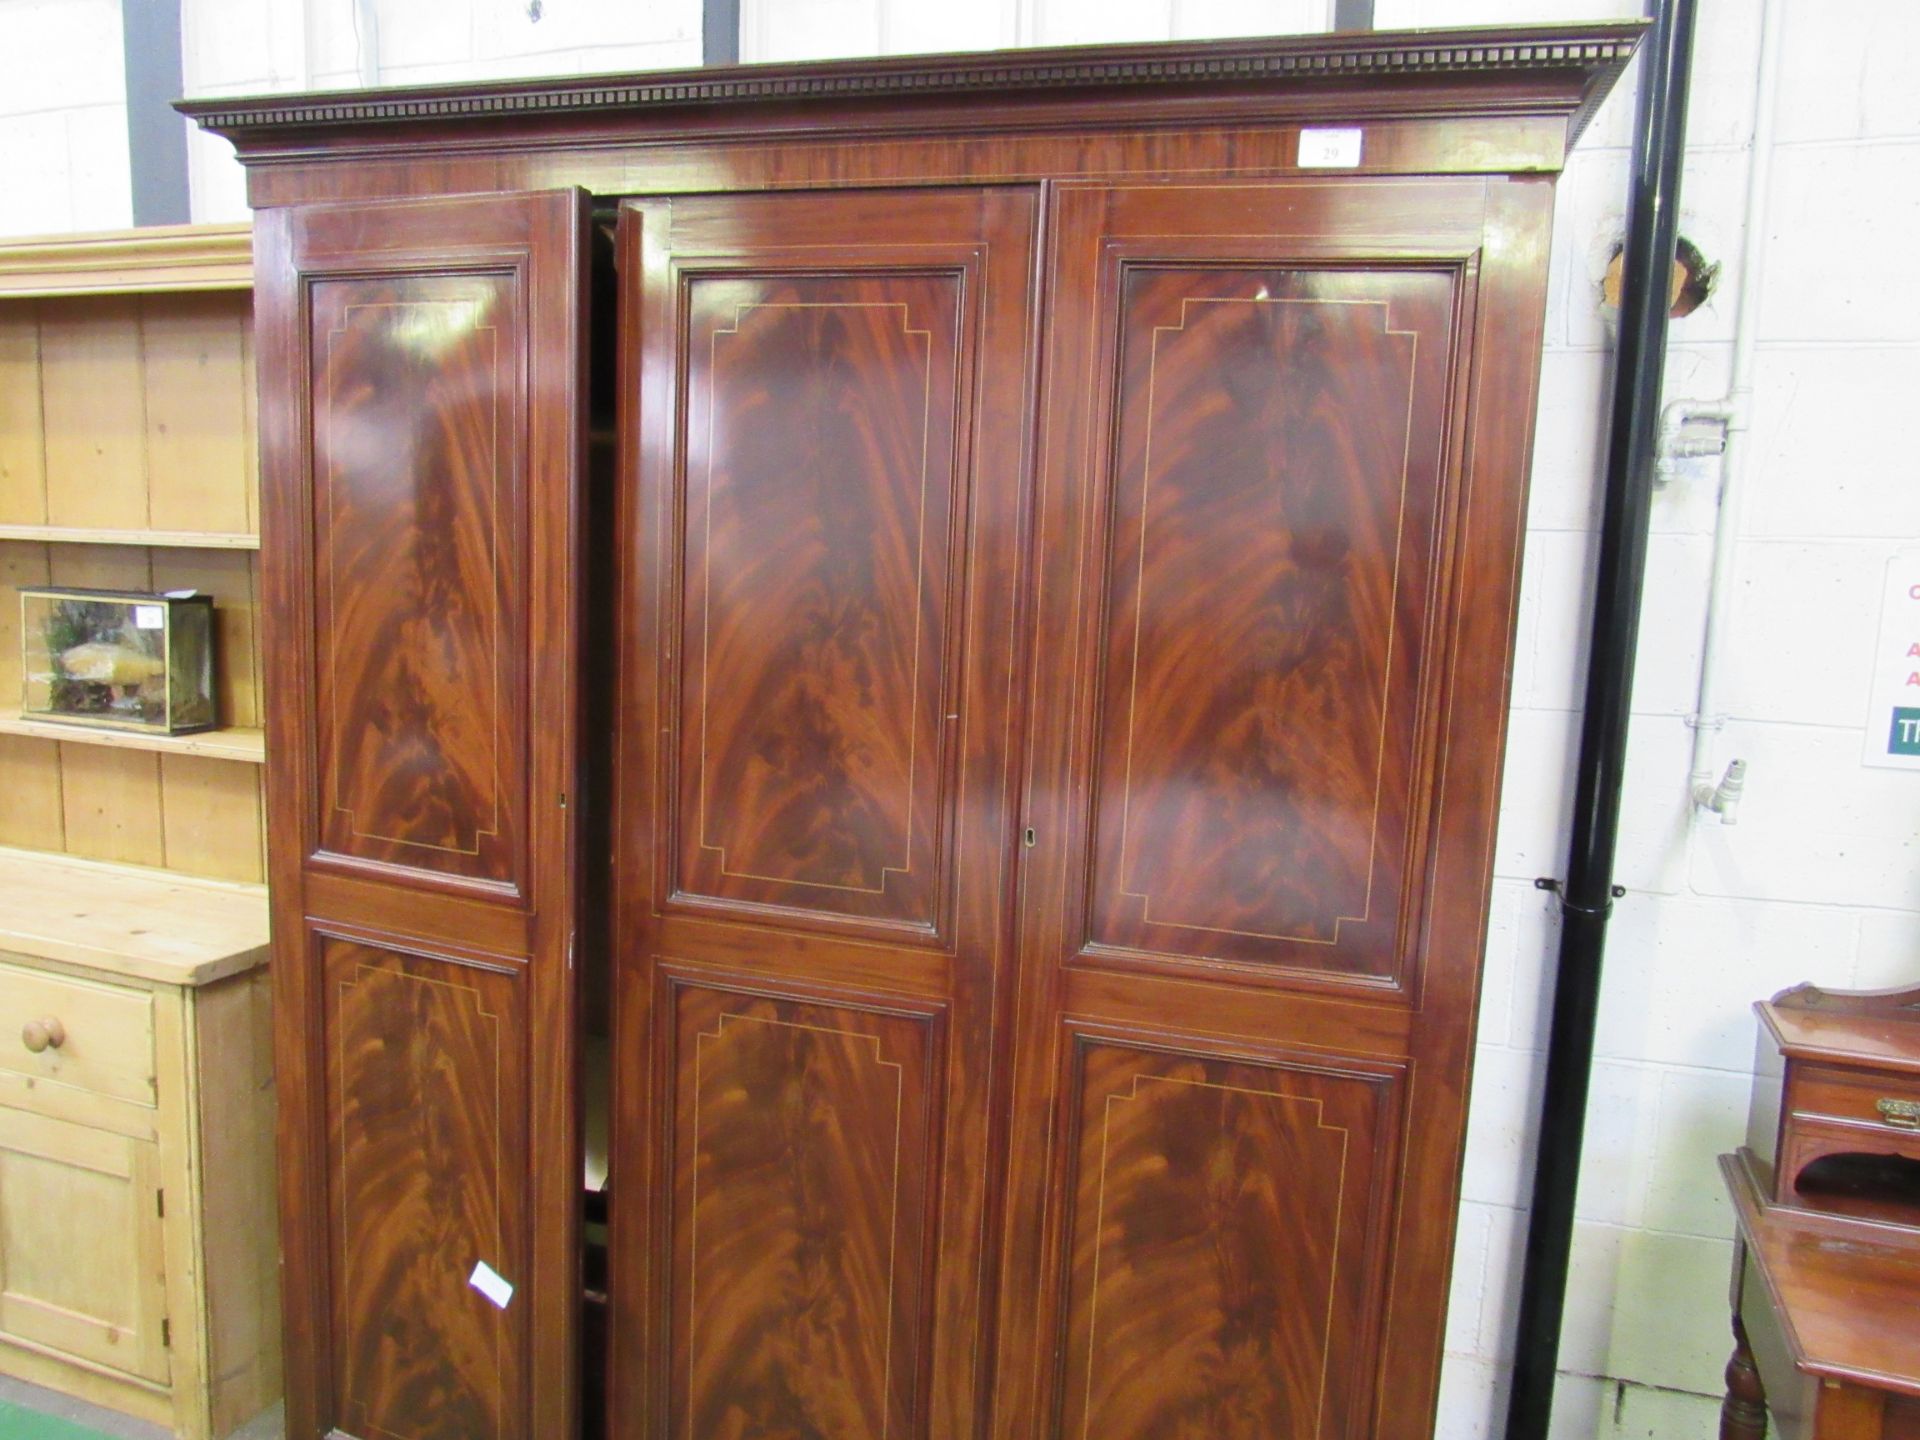 Edwardian Mahogany 3 section wardrobe, with hanging space above drawers, and flame mahogany panel - Image 2 of 7